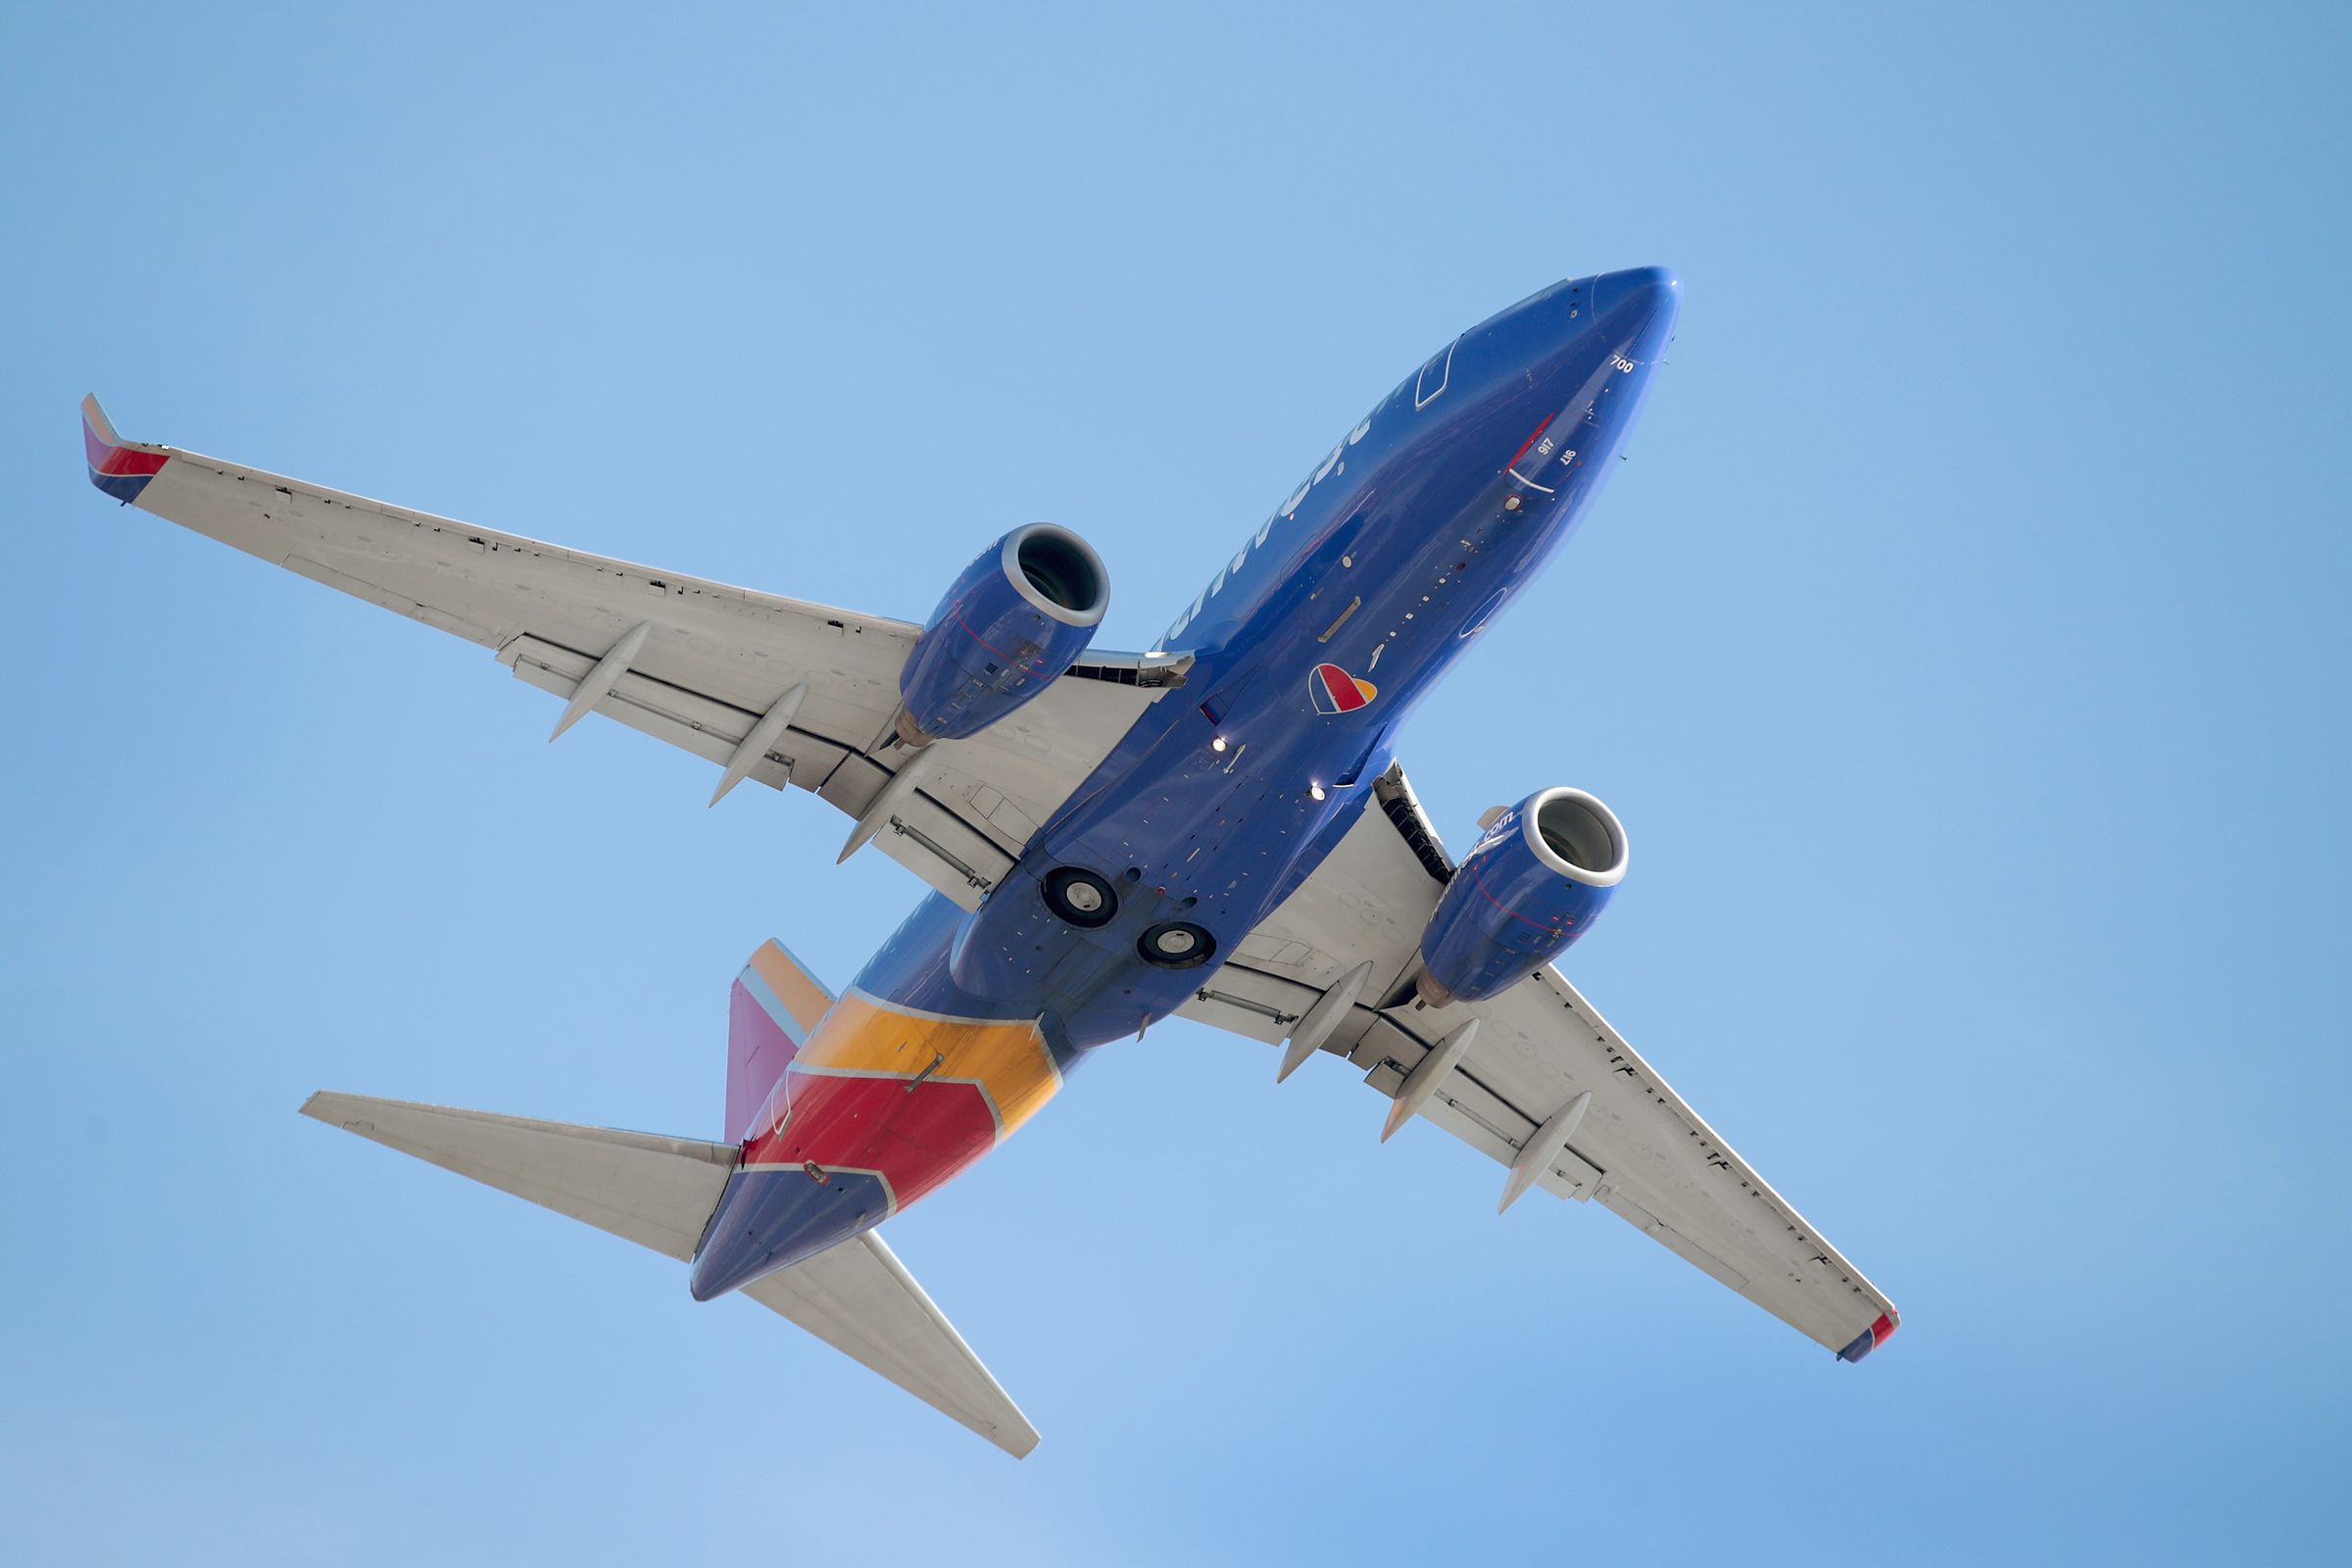 Southwest Airlines Reports Tripling Of Quarterly Profits, Due Largely To Tax Reform Benefits